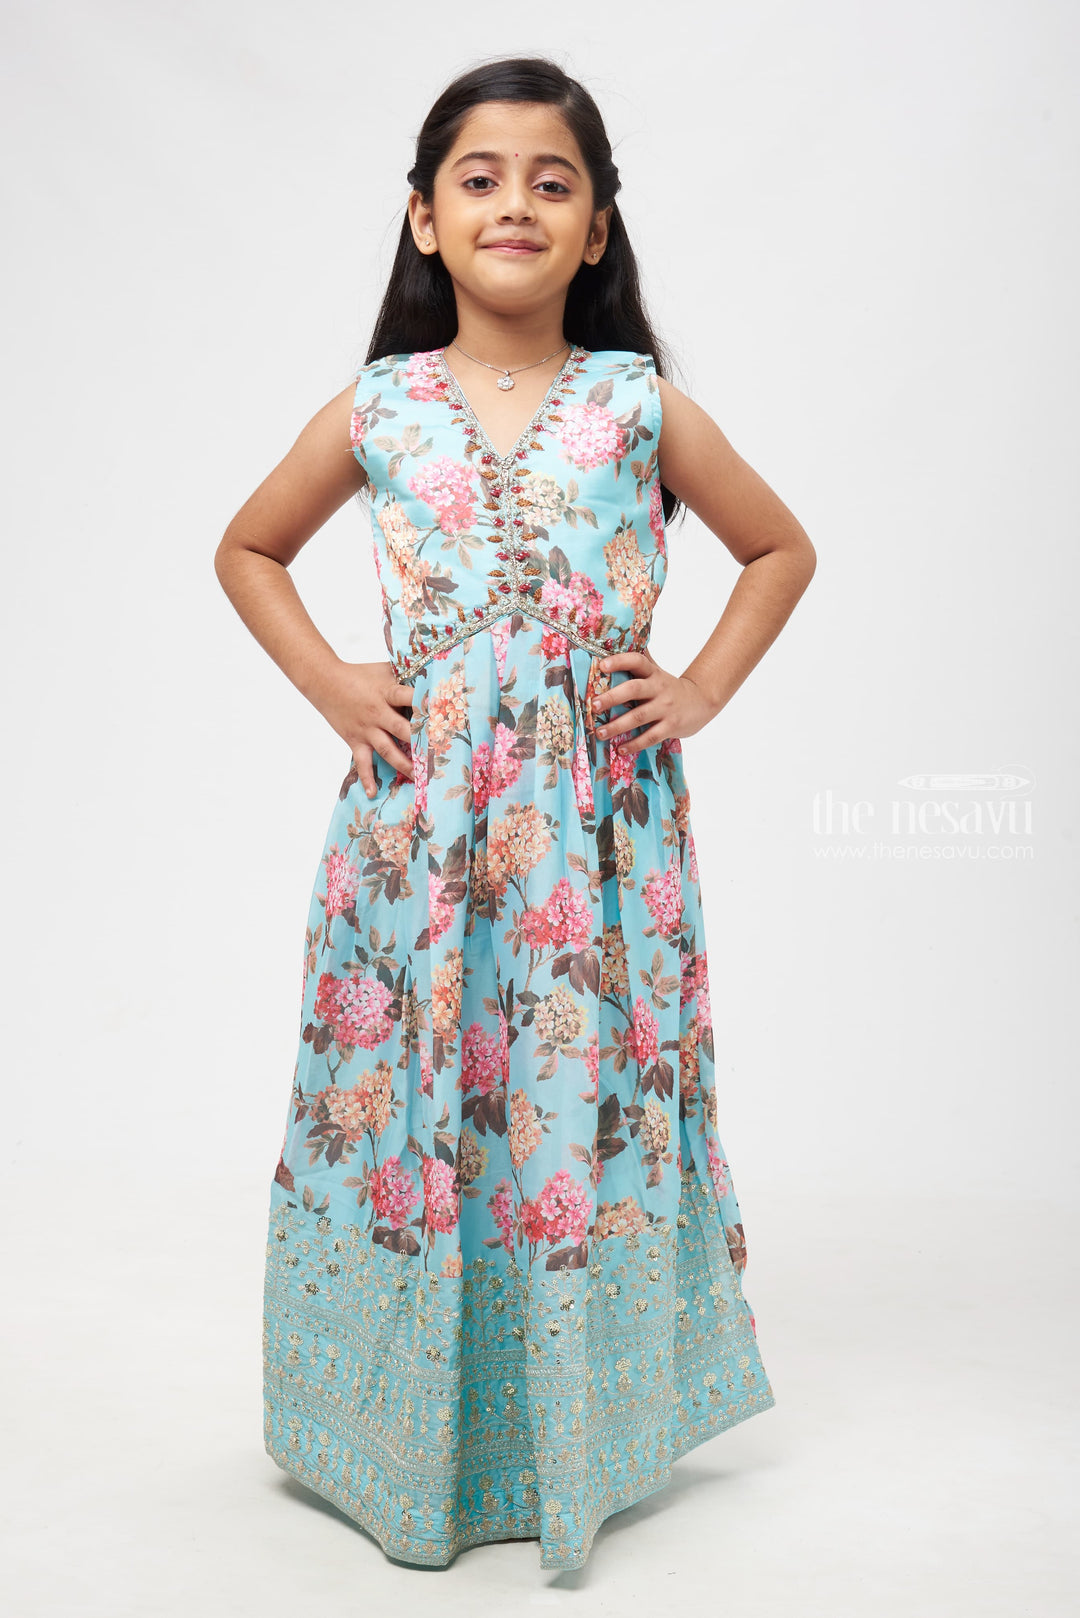 The Nesavu Girls Party Gown Enchanted Turquoise Diwali Gown with Floral Elegance for Girls Nesavu 24 (5Y) / Turquoise / Organza Printed GA175B-24 Girls Enchanted Turquoise Gown | Diwali Elegance Collection | Floral Festive Dress | The Nesavu